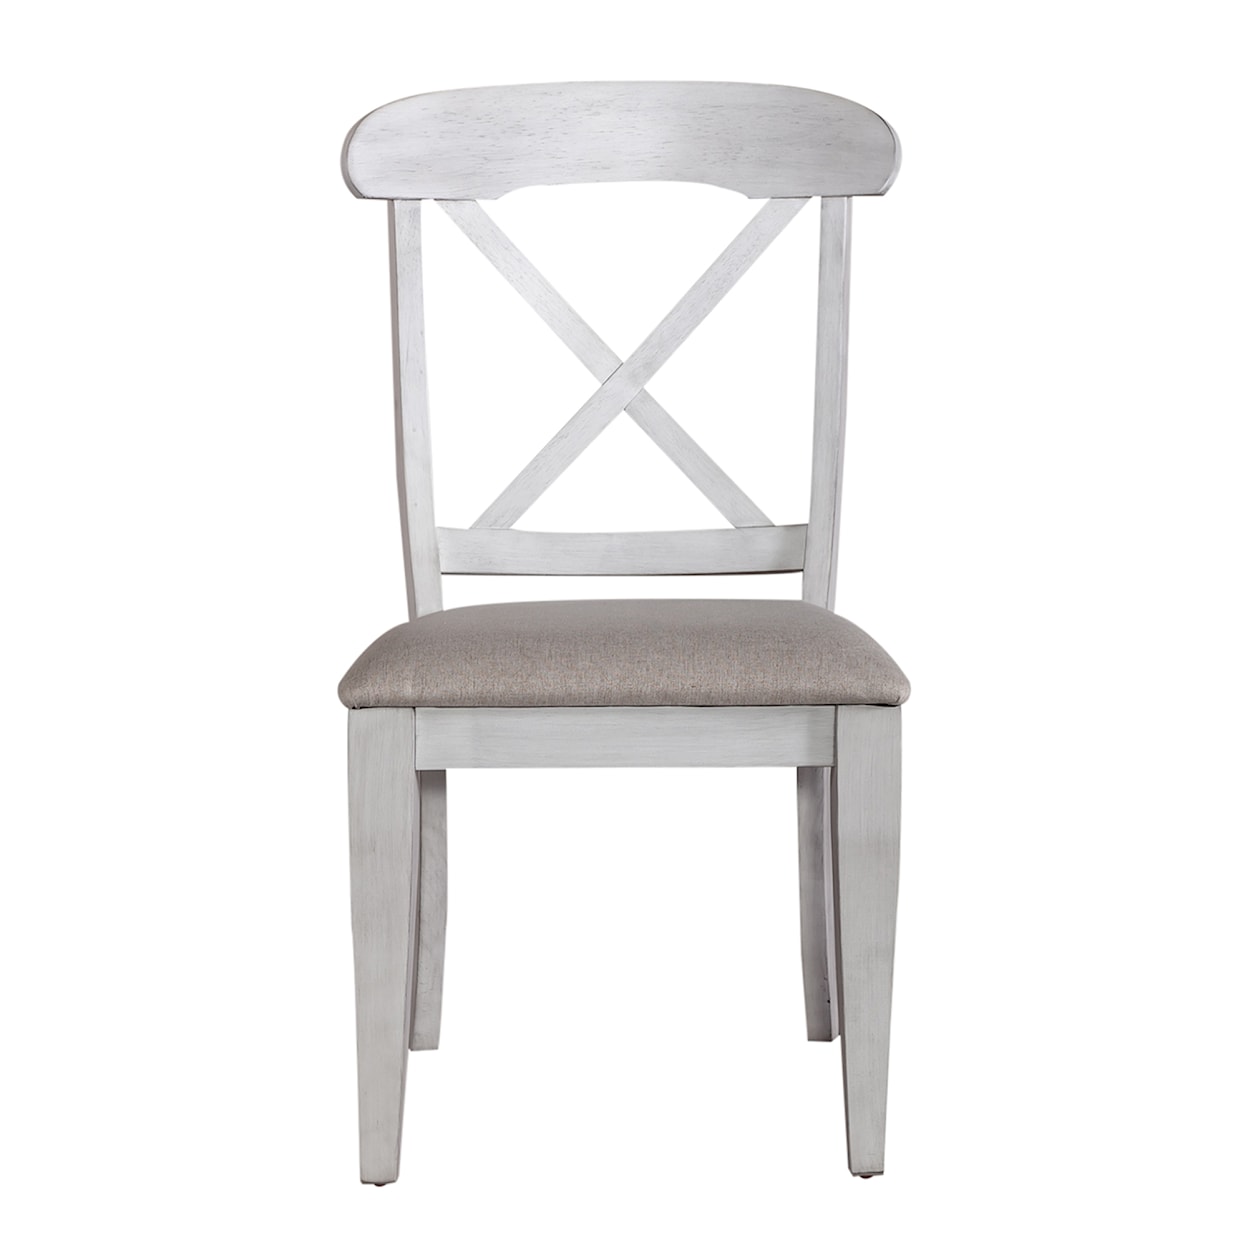 Libby Ocean Isle Upholstered Dining Chair